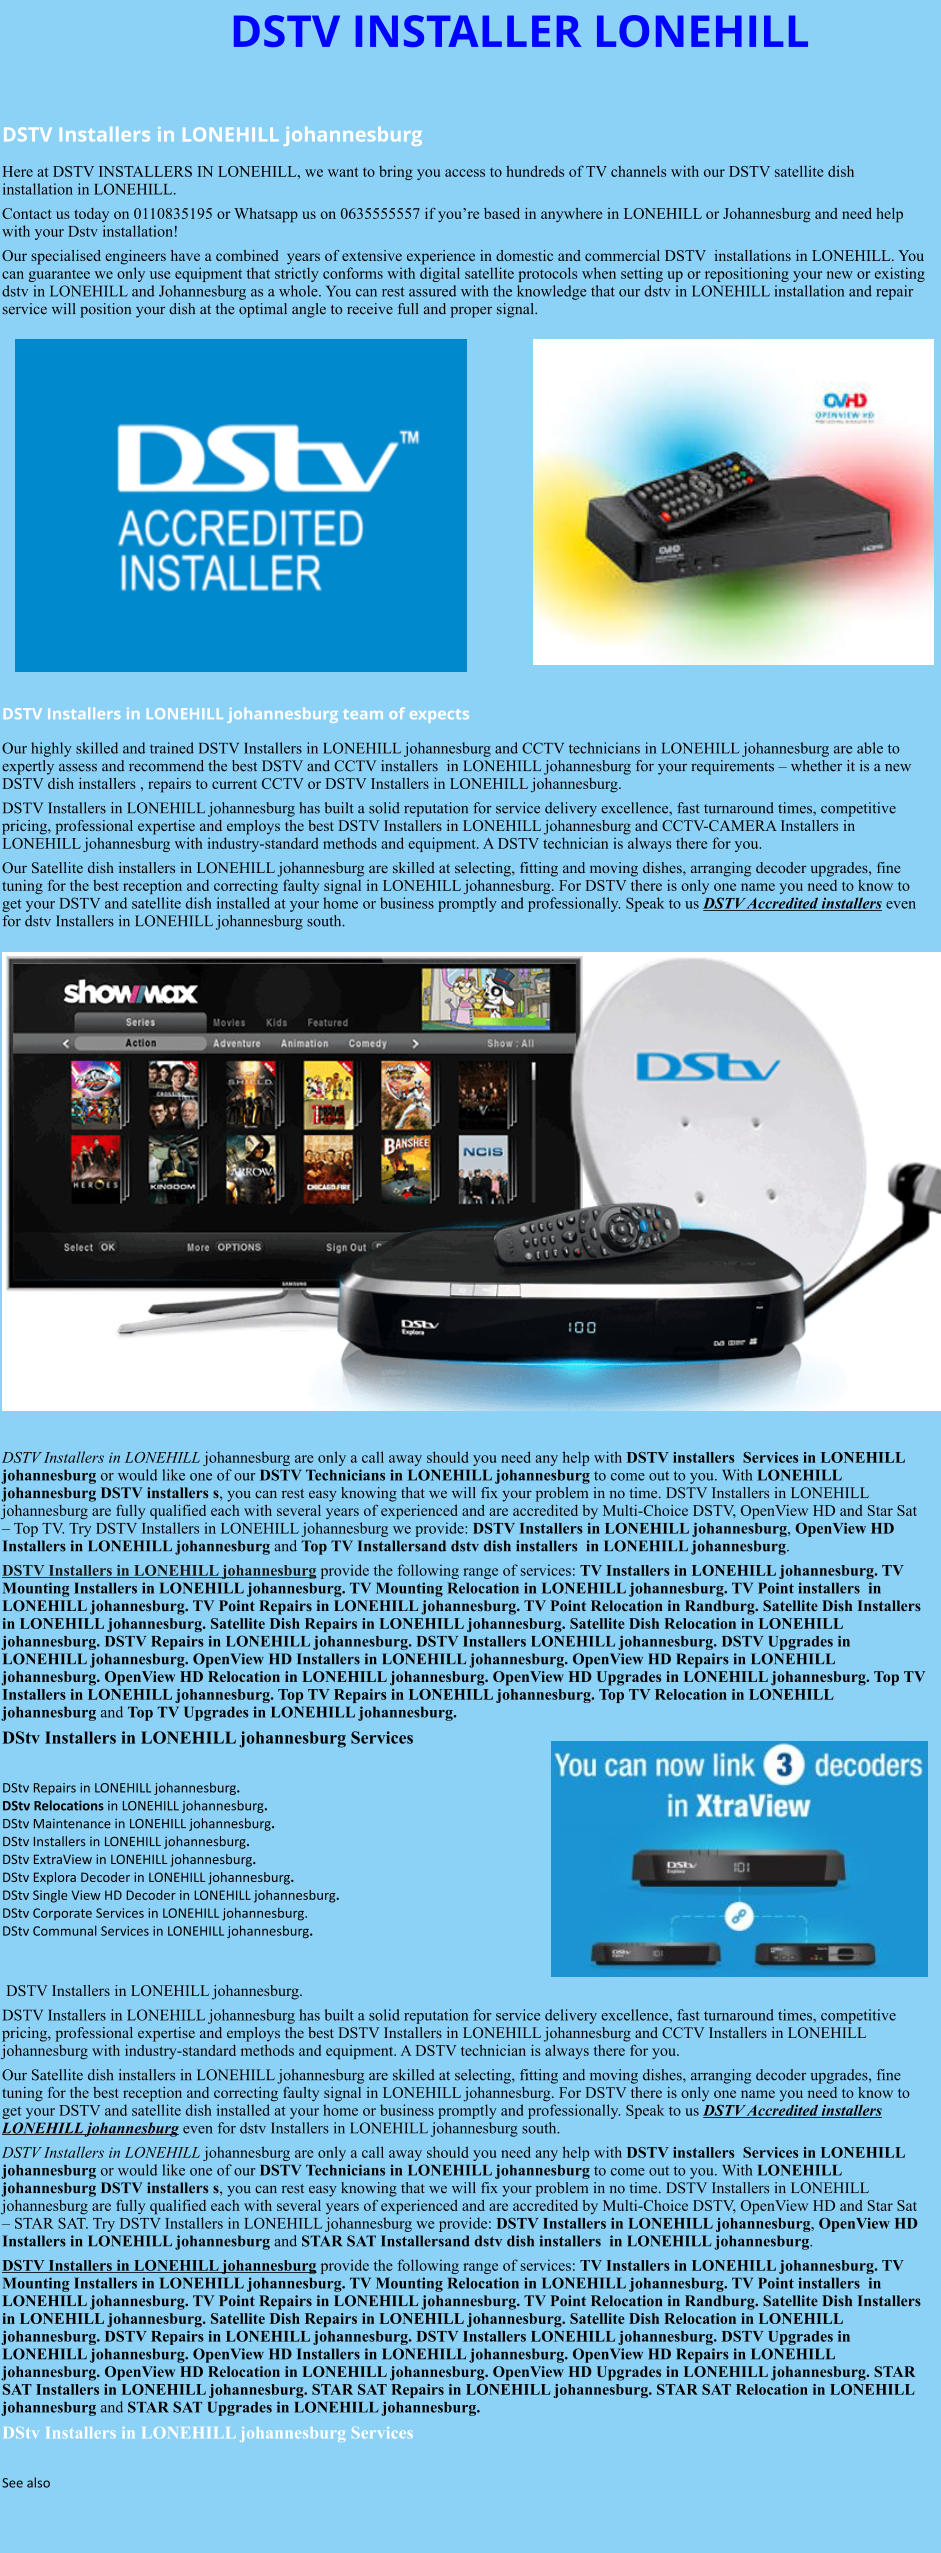 DSTV INSTALLER LONEHILL  DSTV Installers in LONEHILL johannesburg  Here at DSTV INSTALLERS IN LONEHILL, we want to bring you access to hundreds of TV channels with our DSTV satellite dish installation in LONEHILL. Contact us today on 0110835195 or Whatsapp us on 0635555557 if you’re based in anywhere in LONEHILL or Johannesburg and need help with your Dstv installation! Our specialised engineers have a combined  years of extensive experience in domestic and commercial DSTV  installations in LONEHILL. You can guarantee we only use equipment that strictly conforms with digital satellite protocols when setting up or repositioning your new or existing dstv in LONEHILL and Johannesburg as a whole. You can rest assured with the knowledge that our dstv in LONEHILL installation and repair service will position your dish at the optimal angle to receive full and proper signal.                DSTV Installers in LONEHILL johannesburg team of expects Our highly skilled and trained DSTV Installers in LONEHILL johannesburg and CCTV technicians in LONEHILL johannesburg are able to expertly assess and recommend the best DSTV and CCTV installers  in LONEHILL johannesburg for your requirements – whether it is a new DSTV dish installers , repairs to current CCTV or DSTV Installers in LONEHILL johannesburg. DSTV Installers in LONEHILL johannesburg has built a solid reputation for service delivery excellence, fast turnaround times, competitive pricing, professional expertise and employs the best DSTV Installers in LONEHILL johannesburg and CCTV-CAMERA Installers in LONEHILL johannesburg with industry-standard methods and equipment. A DSTV technician is always there for you. Our Satellite dish installers in LONEHILL johannesburg are skilled at selecting, fitting and moving dishes, arranging decoder upgrades, fine tuning for the best reception and correcting faulty signal in LONEHILL johannesburg. For DSTV there is only one name you need to know to get your DSTV and satellite dish installed at your home or business promptly and professionally. Speak to us DSTV Accredited installers even for dstv Installers in LONEHILL johannesburg south.                      DSTV Installers in LONEHILL johannesburg are only a call away should you need any help with DSTV installers  Services in LONEHILL johannesburg or would like one of our DSTV Technicians in LONEHILL johannesburg to come out to you. With LONEHILL johannesburg DSTV installers s, you can rest easy knowing that we will fix your problem in no time. DSTV Installers in LONEHILL johannesburg are fully qualified each with several years of experienced and are accredited by Multi-Choice DSTV, OpenView HD and Star Sat – Top TV. Try DSTV Installers in LONEHILL johannesburg we provide: DSTV Installers in LONEHILL johannesburg, OpenView HD Installers in LONEHILL johannesburg and Top TV Installersand dstv dish installers  in LONEHILL johannesburg. DSTV Installers in LONEHILL johannesburg provide the following range of services: TV Installers in LONEHILL johannesburg. TV Mounting Installers in LONEHILL johannesburg. TV Mounting Relocation in LONEHILL johannesburg. TV Point installers  in LONEHILL johannesburg. TV Point Repairs in LONEHILL johannesburg. TV Point Relocation in Randburg. Satellite Dish Installers in LONEHILL johannesburg. Satellite Dish Repairs in LONEHILL johannesburg. Satellite Dish Relocation in LONEHILL johannesburg. DSTV Repairs in LONEHILL johannesburg. DSTV Installers LONEHILL johannesburg. DSTV Upgrades in LONEHILL johannesburg. OpenView HD Installers in LONEHILL johannesburg. OpenView HD Repairs in LONEHILL johannesburg. OpenView HD Relocation in LONEHILL johannesburg. OpenView HD Upgrades in LONEHILL johannesburg. Top TV Installers in LONEHILL johannesburg. Top TV Repairs in LONEHILL johannesburg. Top TV Relocation in LONEHILL johannesburg and Top TV Upgrades in LONEHILL johannesburg. DStv Installers in LONEHILL johannesburg Services  DStv Repairs in LONEHILL johannesburg.  DStv Relocations in LONEHILL johannesburg.  DStv Maintenance in LONEHILL johannesburg. DStv Installers in LONEHILL johannesburg. DStv ExtraView in LONEHILL johannesburg. DStv Explora Decoder in LONEHILL johannesburg. DStv Single View HD Decoder in LONEHILL johannesburg. DStv Corporate Services in LONEHILL johannesburg. DStv Communal Services in LONEHILL johannesburg.    DSTV Installers in LONEHILL johannesburg. DSTV Installers in LONEHILL johannesburg has built a solid reputation for service delivery excellence, fast turnaround times, competitive pricing, professional expertise and employs the best DSTV Installers in LONEHILL johannesburg and CCTV Installers in LONEHILL johannesburg with industry-standard methods and equipment. A DSTV technician is always there for you. Our Satellite dish installers in LONEHILL johannesburg are skilled at selecting, fitting and moving dishes, arranging decoder upgrades, fine tuning for the best reception and correcting faulty signal in LONEHILL johannesburg. For DSTV there is only one name you need to know to get your DSTV and satellite dish installed at your home or business promptly and professionally. Speak to us DSTV Accredited installers LONEHILL johannesburg even for dstv Installers in LONEHILL johannesburg south. DSTV Installers in LONEHILL johannesburg are only a call away should you need any help with DSTV installers  Services in LONEHILL johannesburg or would like one of our DSTV Technicians in LONEHILL johannesburg to come out to you. With LONEHILL johannesburg DSTV installers s, you can rest easy knowing that we will fix your problem in no time. DSTV Installers in LONEHILL johannesburg are fully qualified each with several years of experienced and are accredited by Multi-Choice DSTV, OpenView HD and Star Sat – STAR SAT. Try DSTV Installers in LONEHILL johannesburg we provide: DSTV Installers in LONEHILL johannesburg, OpenView HD Installers in LONEHILL johannesburg and STAR SAT Installersand dstv dish installers  in LONEHILL johannesburg. DSTV Installers in LONEHILL johannesburg provide the following range of services: TV Installers in LONEHILL johannesburg. TV Mounting Installers in LONEHILL johannesburg. TV Mounting Relocation in LONEHILL johannesburg. TV Point installers  in LONEHILL johannesburg. TV Point Repairs in LONEHILL johannesburg. TV Point Relocation in Randburg. Satellite Dish Installers in LONEHILL johannesburg. Satellite Dish Repairs in LONEHILL johannesburg. Satellite Dish Relocation in LONEHILL johannesburg. DSTV Repairs in LONEHILL johannesburg. DSTV Installers LONEHILL johannesburg. DSTV Upgrades in LONEHILL johannesburg. OpenView HD Installers in LONEHILL johannesburg. OpenView HD Repairs in LONEHILL johannesburg. OpenView HD Relocation in LONEHILL johannesburg. OpenView HD Upgrades in LONEHILL johannesburg. STAR SAT Installers in LONEHILL johannesburg. STAR SAT Repairs in LONEHILL johannesburg. STAR SAT Relocation in LONEHILL johannesburg and STAR SAT Upgrades in LONEHILL johannesburg. DStv Installers in LONEHILL johannesburg Services  See also